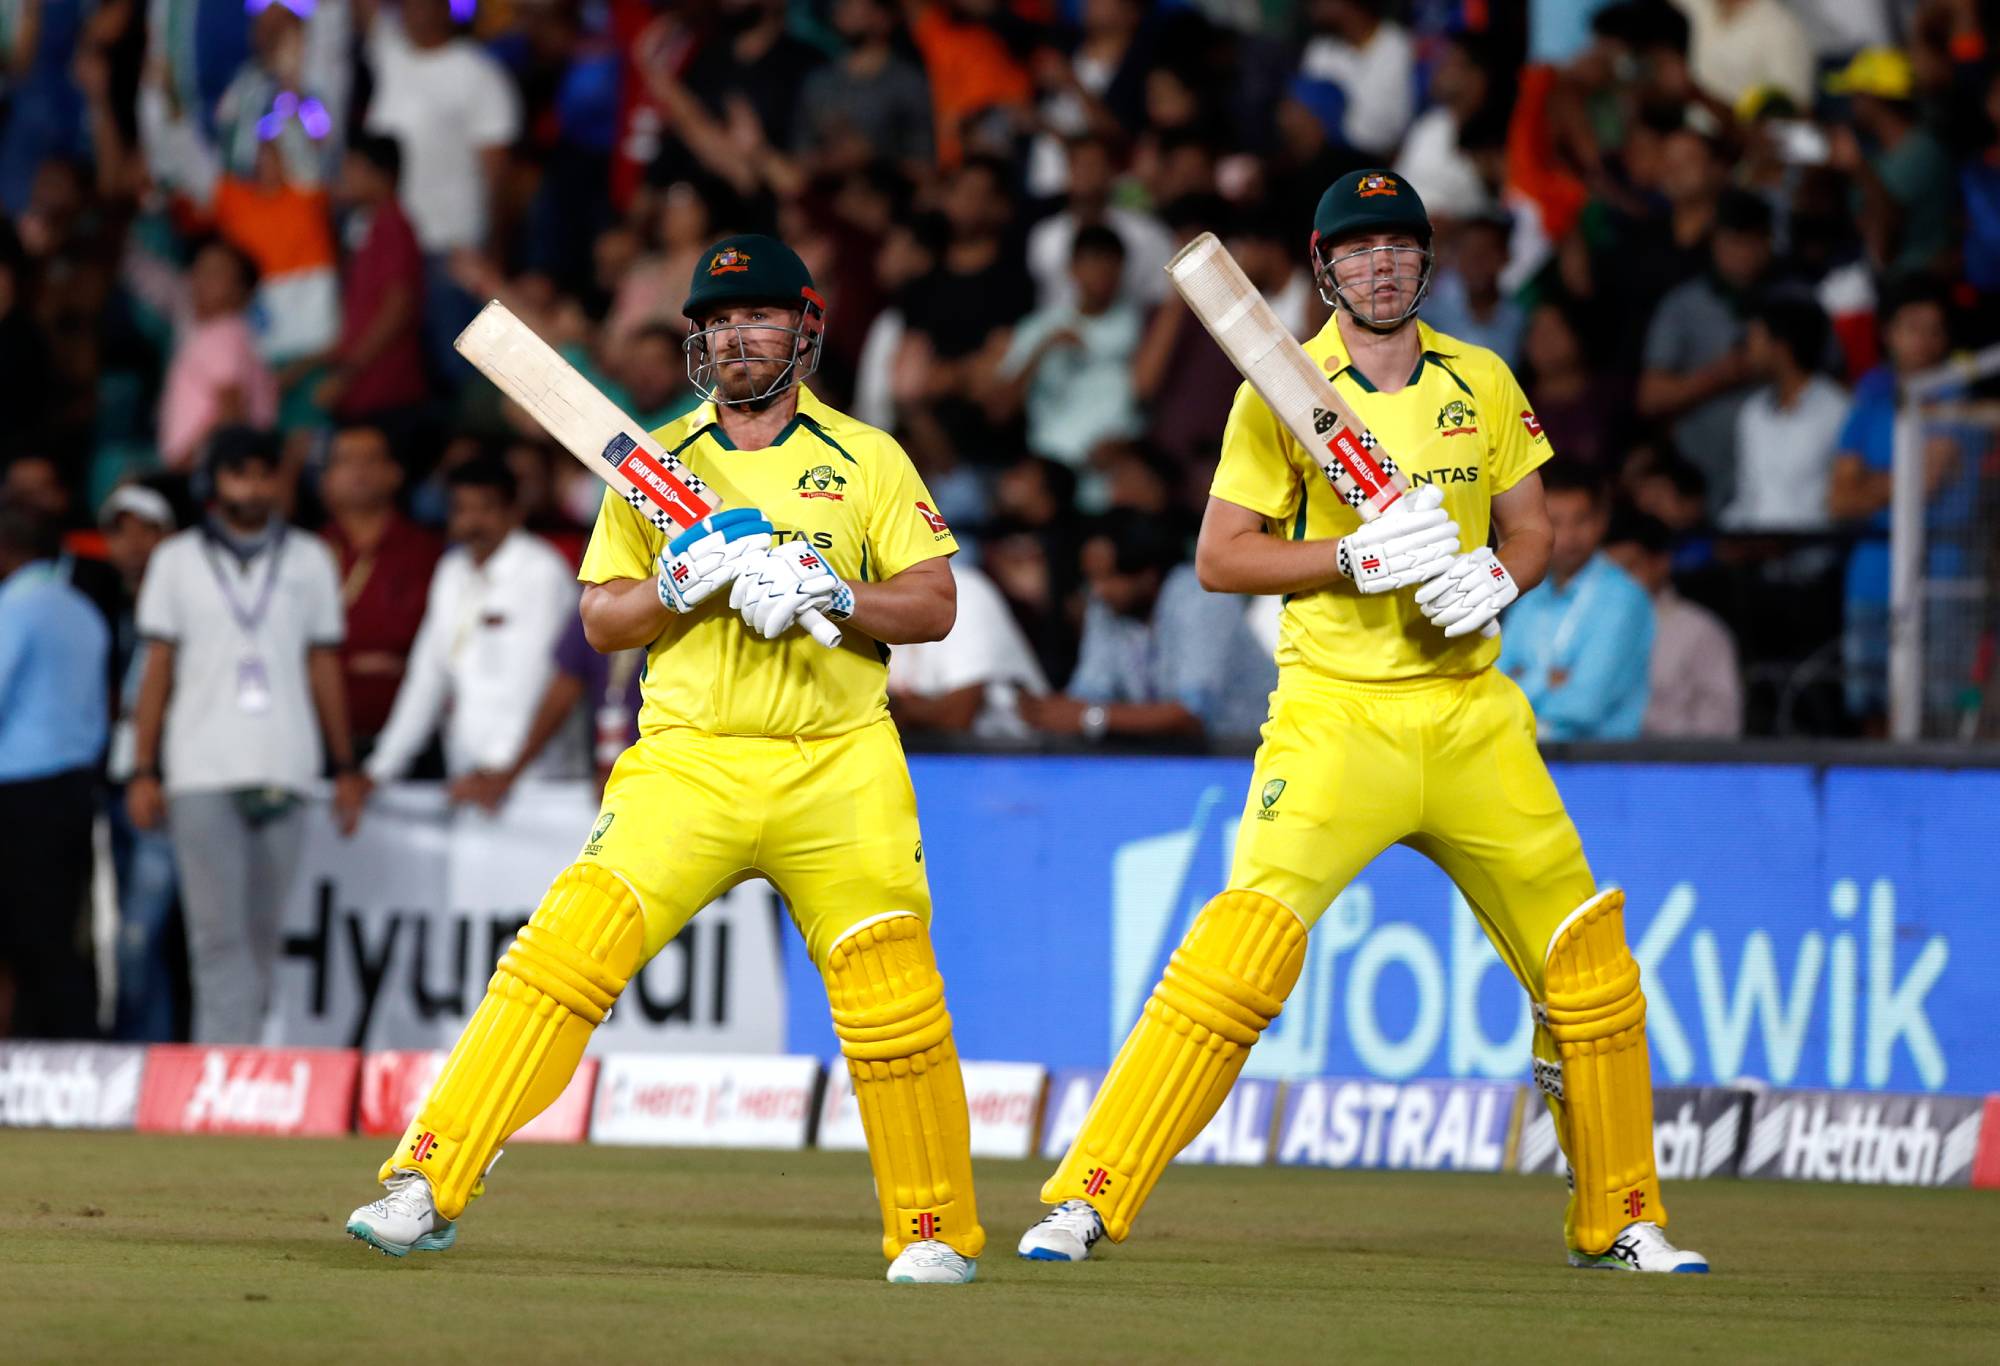 NAGPUR, INDIA - SEPTEMBER 23: Aaron Finch and Cameron Green of Australia arrive on the ground for the start of game two of the T20 International series between India and Australia at Vidarbha Cricket Association Stadium on September 23, 2022 in Nagpur, India. (Photo by Pankaj Nangia/Getty Images)